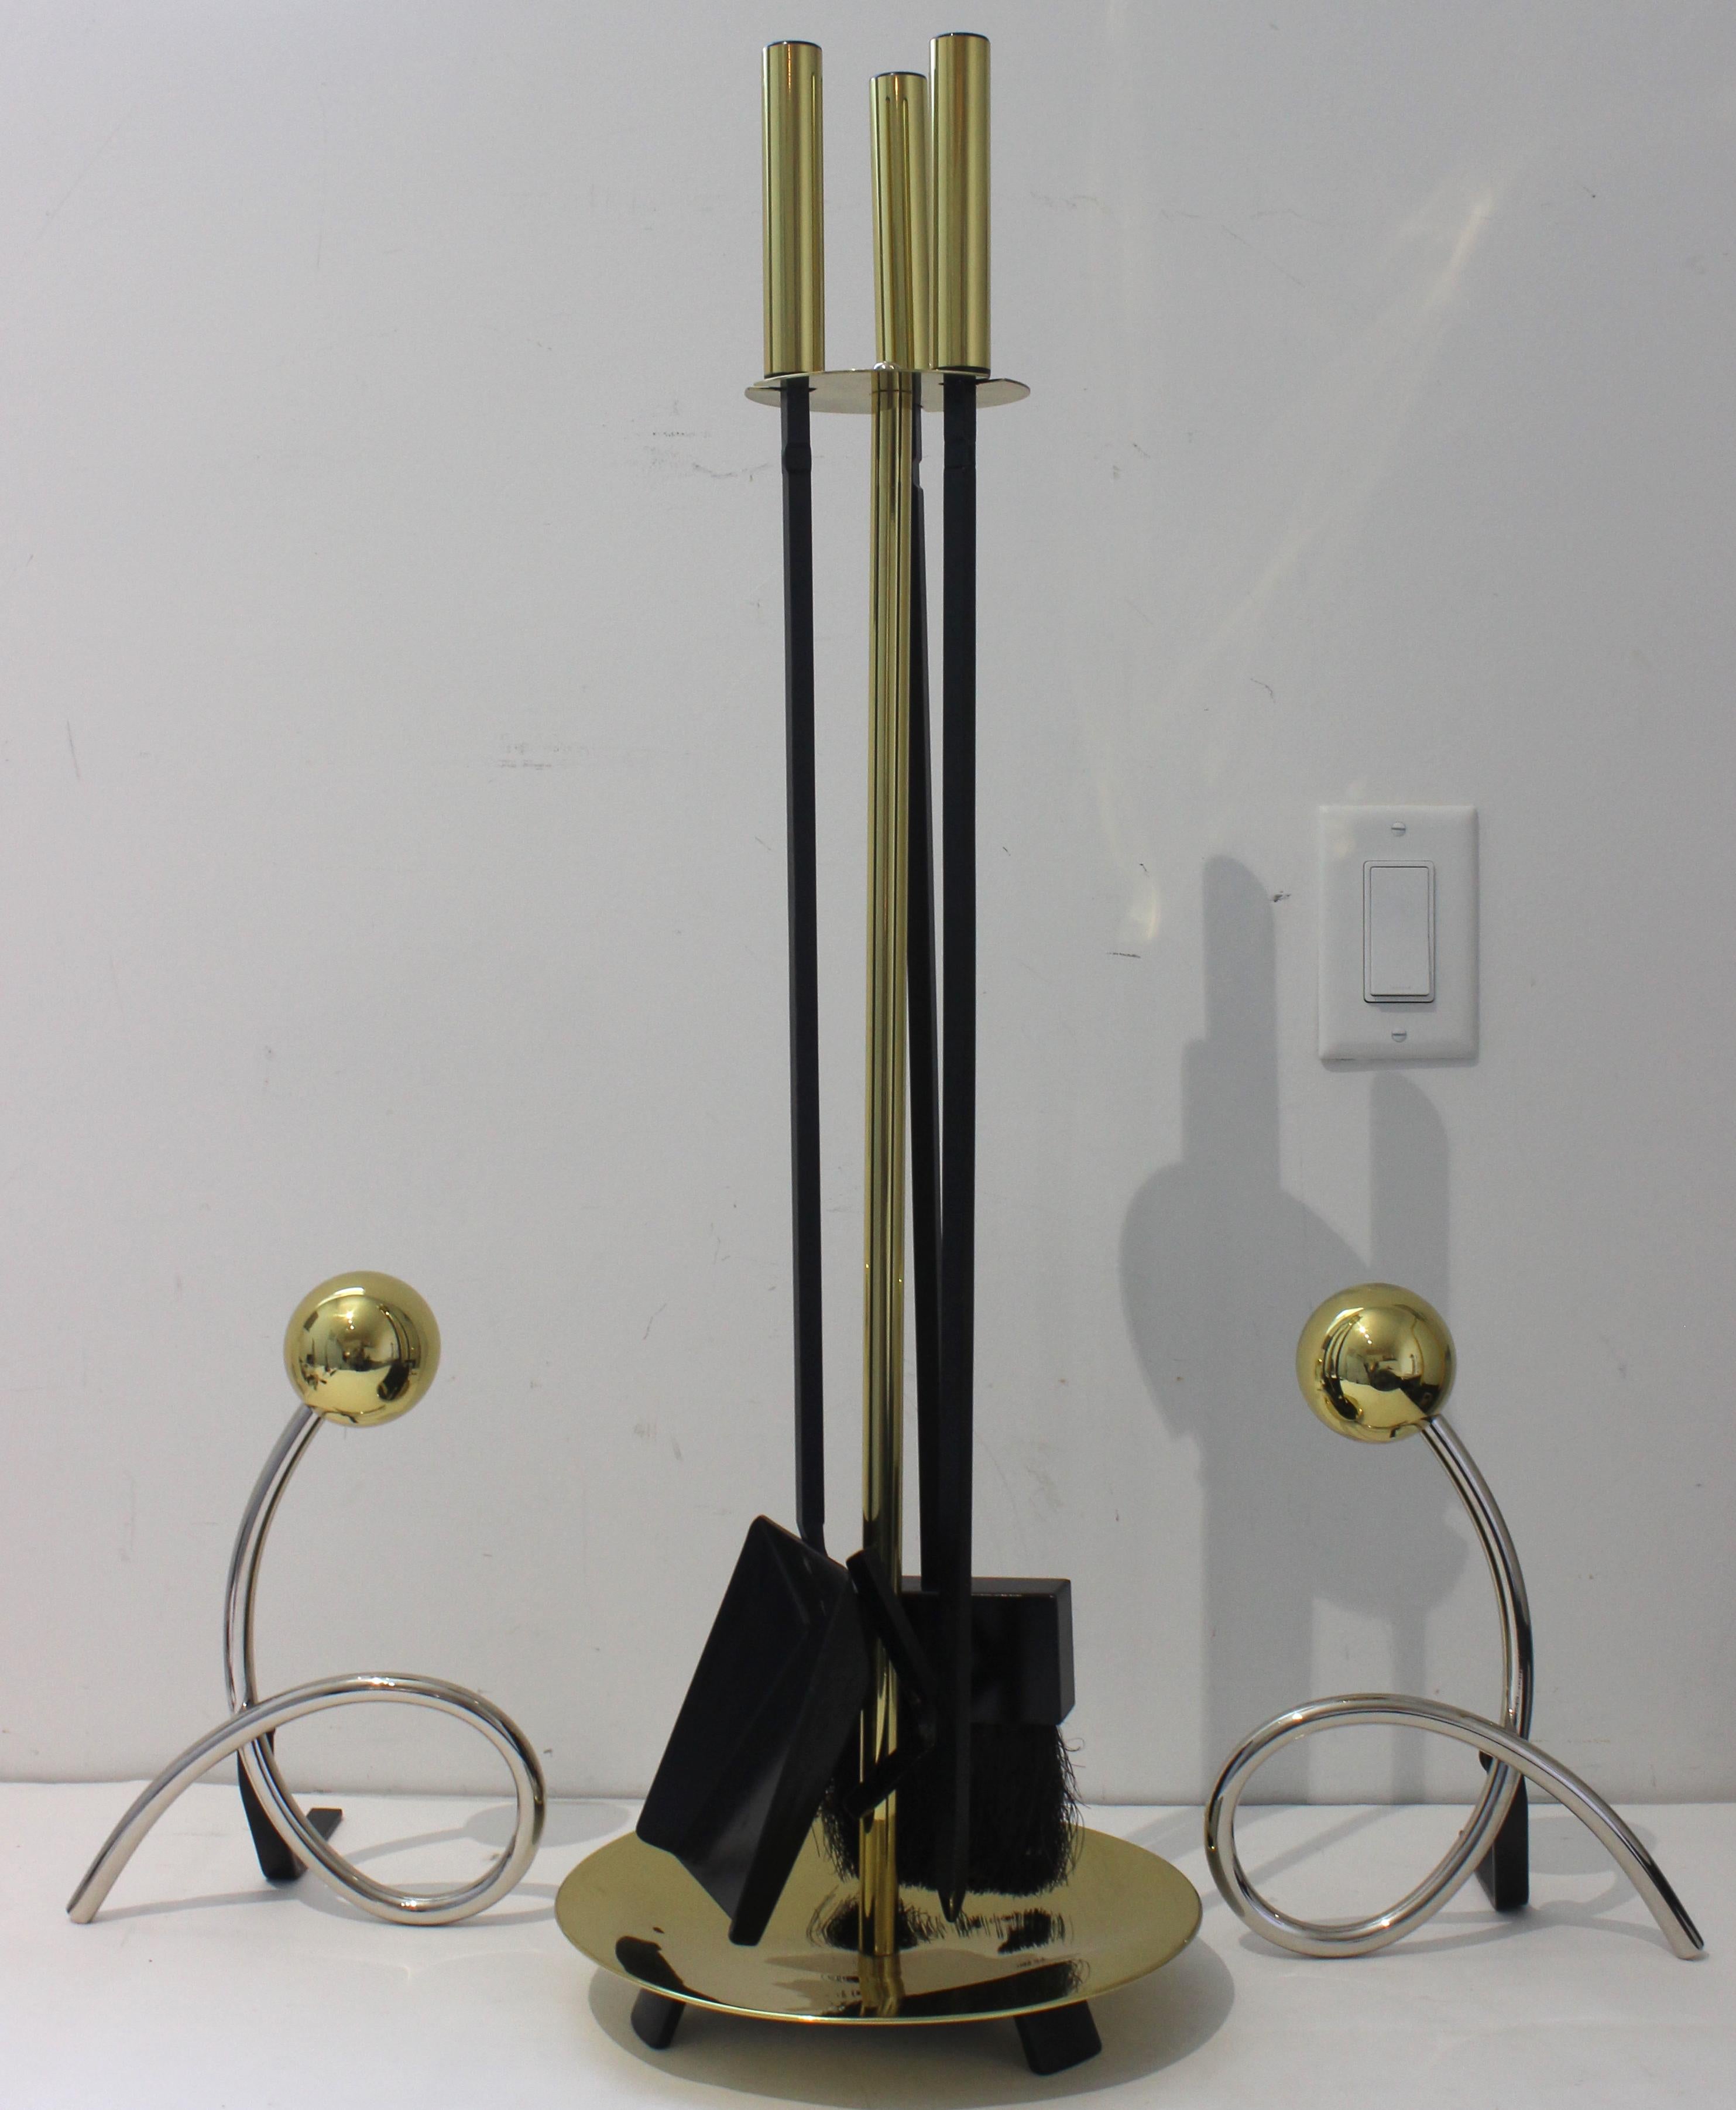 This stylish and chic set of fireplace tools and andirons are by Donald Deskey and they date to the 1950s-1960s.

Note: Dimensions of the andiron are 11